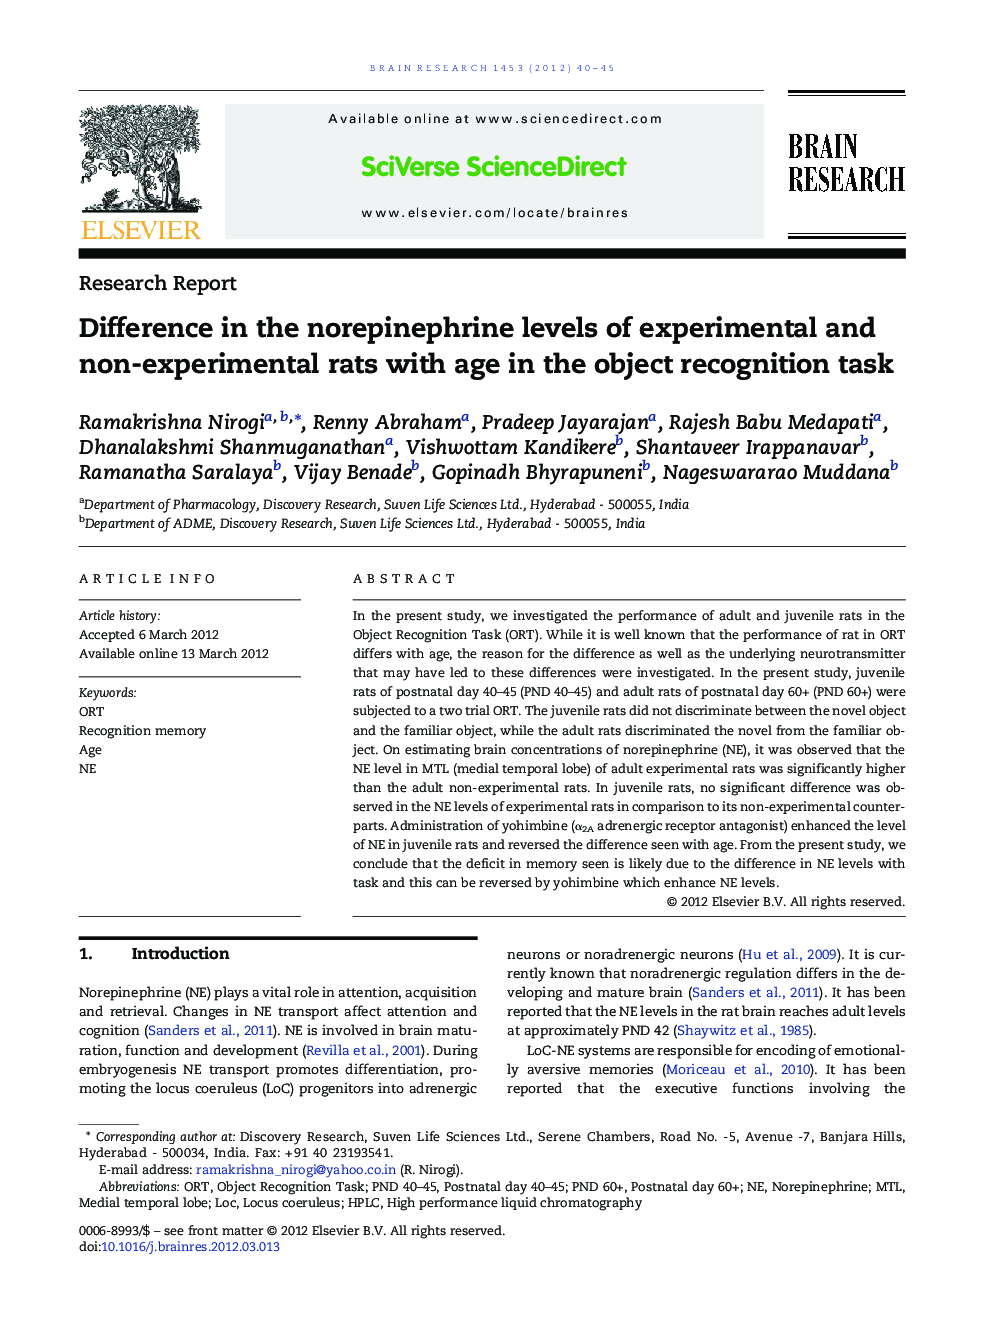 Research ReportDifference in the norepinephrine levels of experimental and non-experimental rats with age in the object recognition task